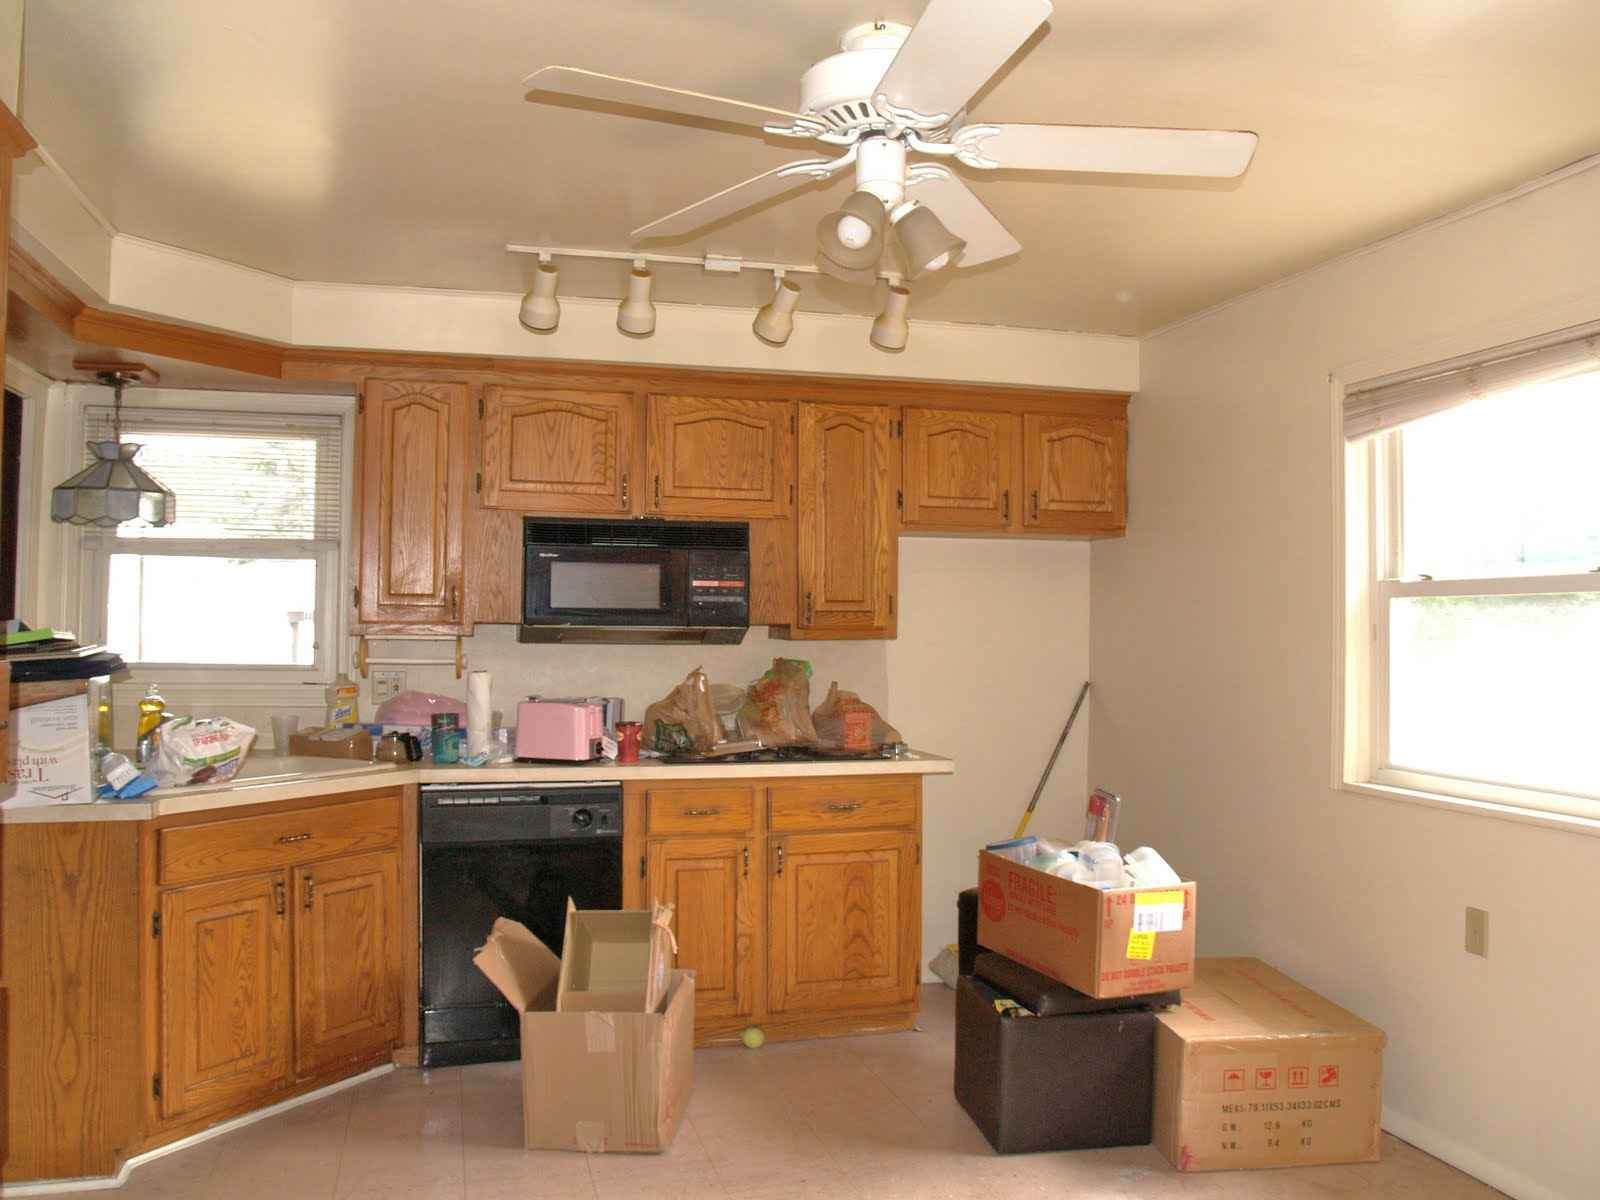 Kitchen Fan With Lights
 10 Tips To Help You Get the Right Ceiling fan for kitchen